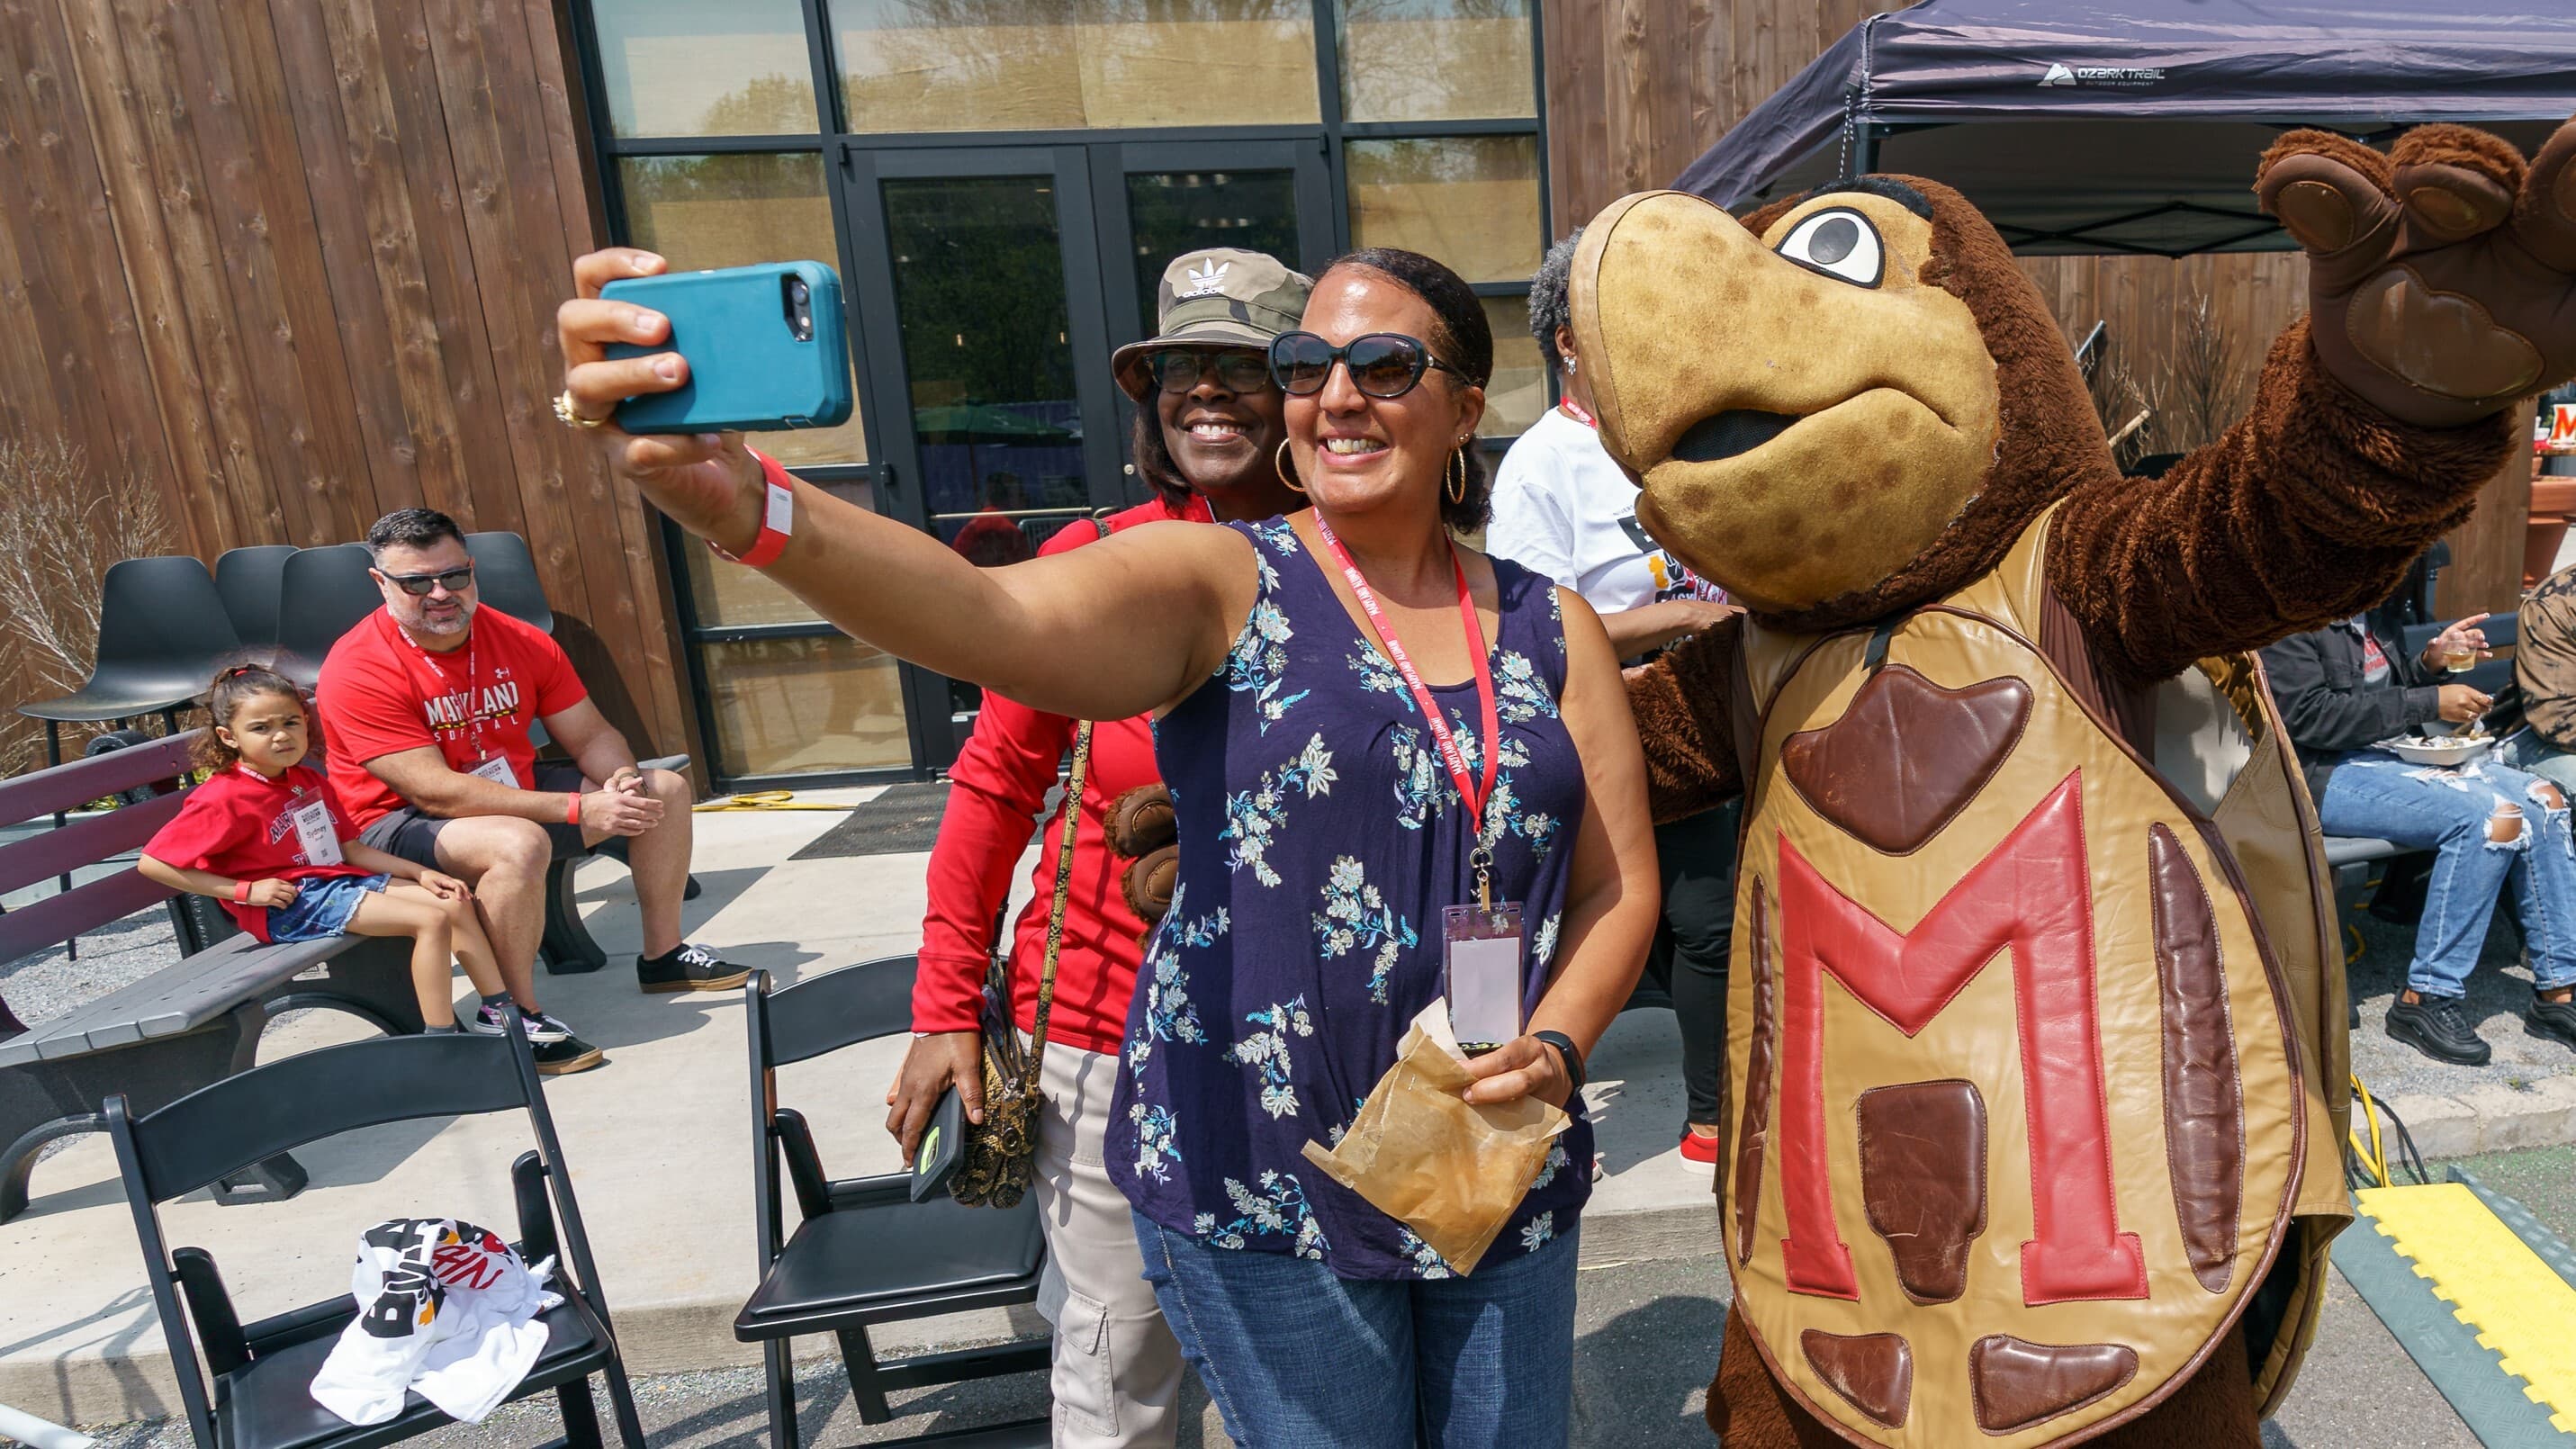 Alums taking a photo with Testudo at Terpchella